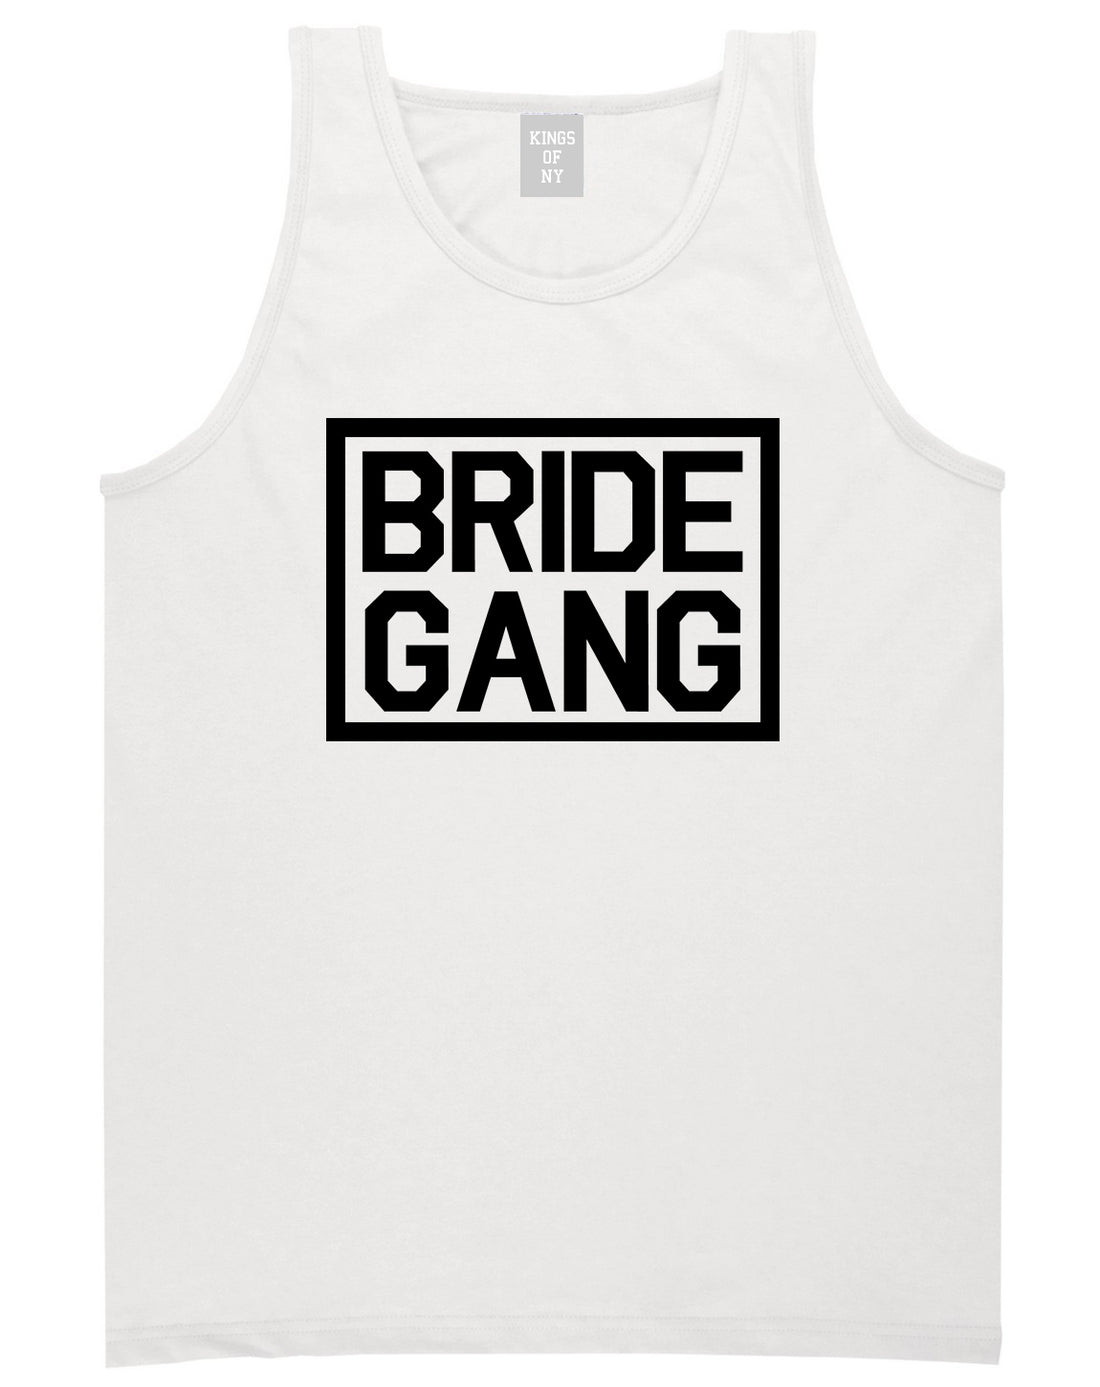 Bride Gang Bachlorette Party White Tank Top Shirt by Kings Of NY